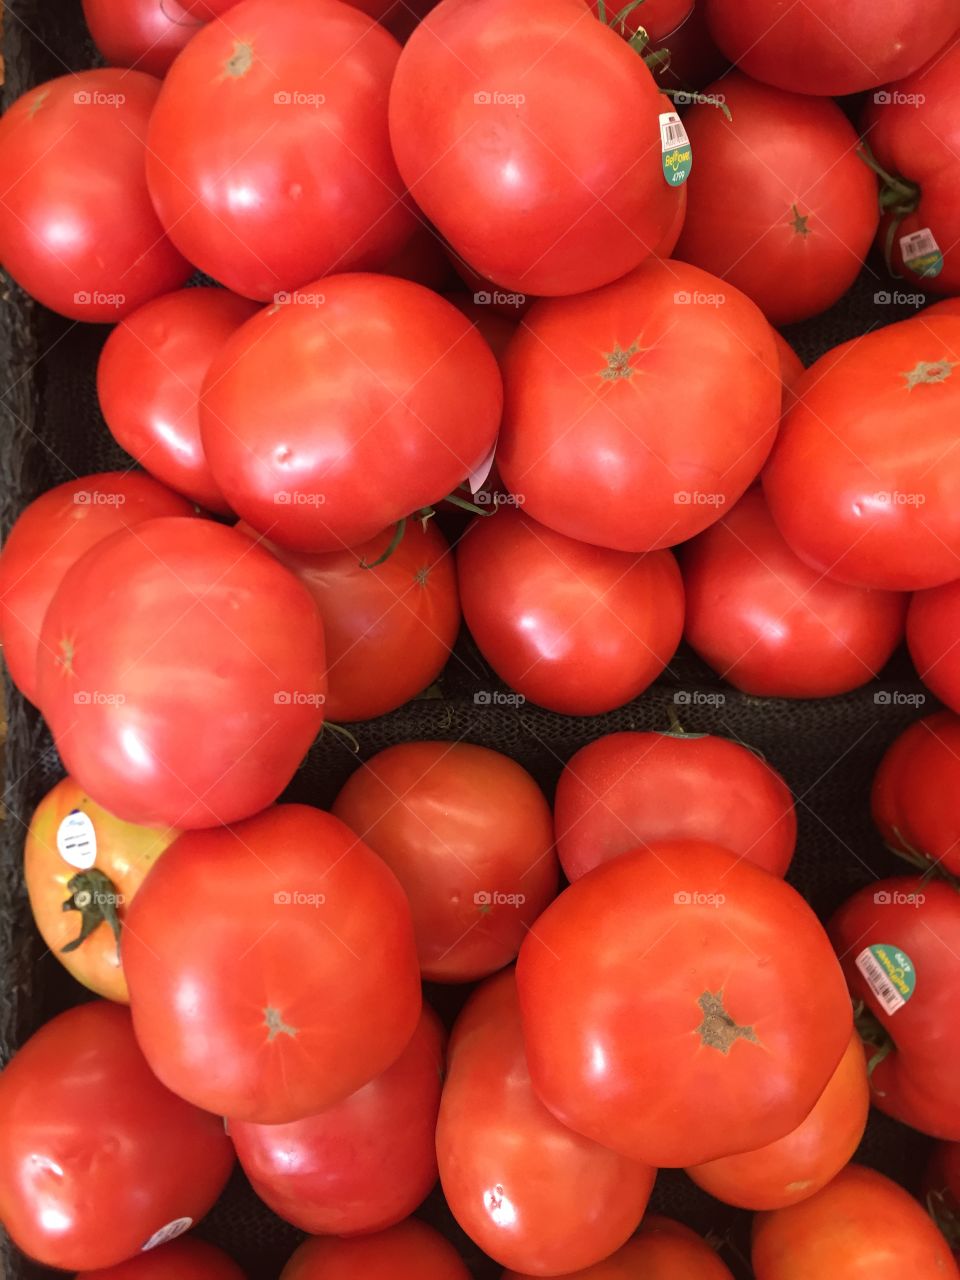 These tomatoes are so amazing looking just want to buy them all and do jarring for winter